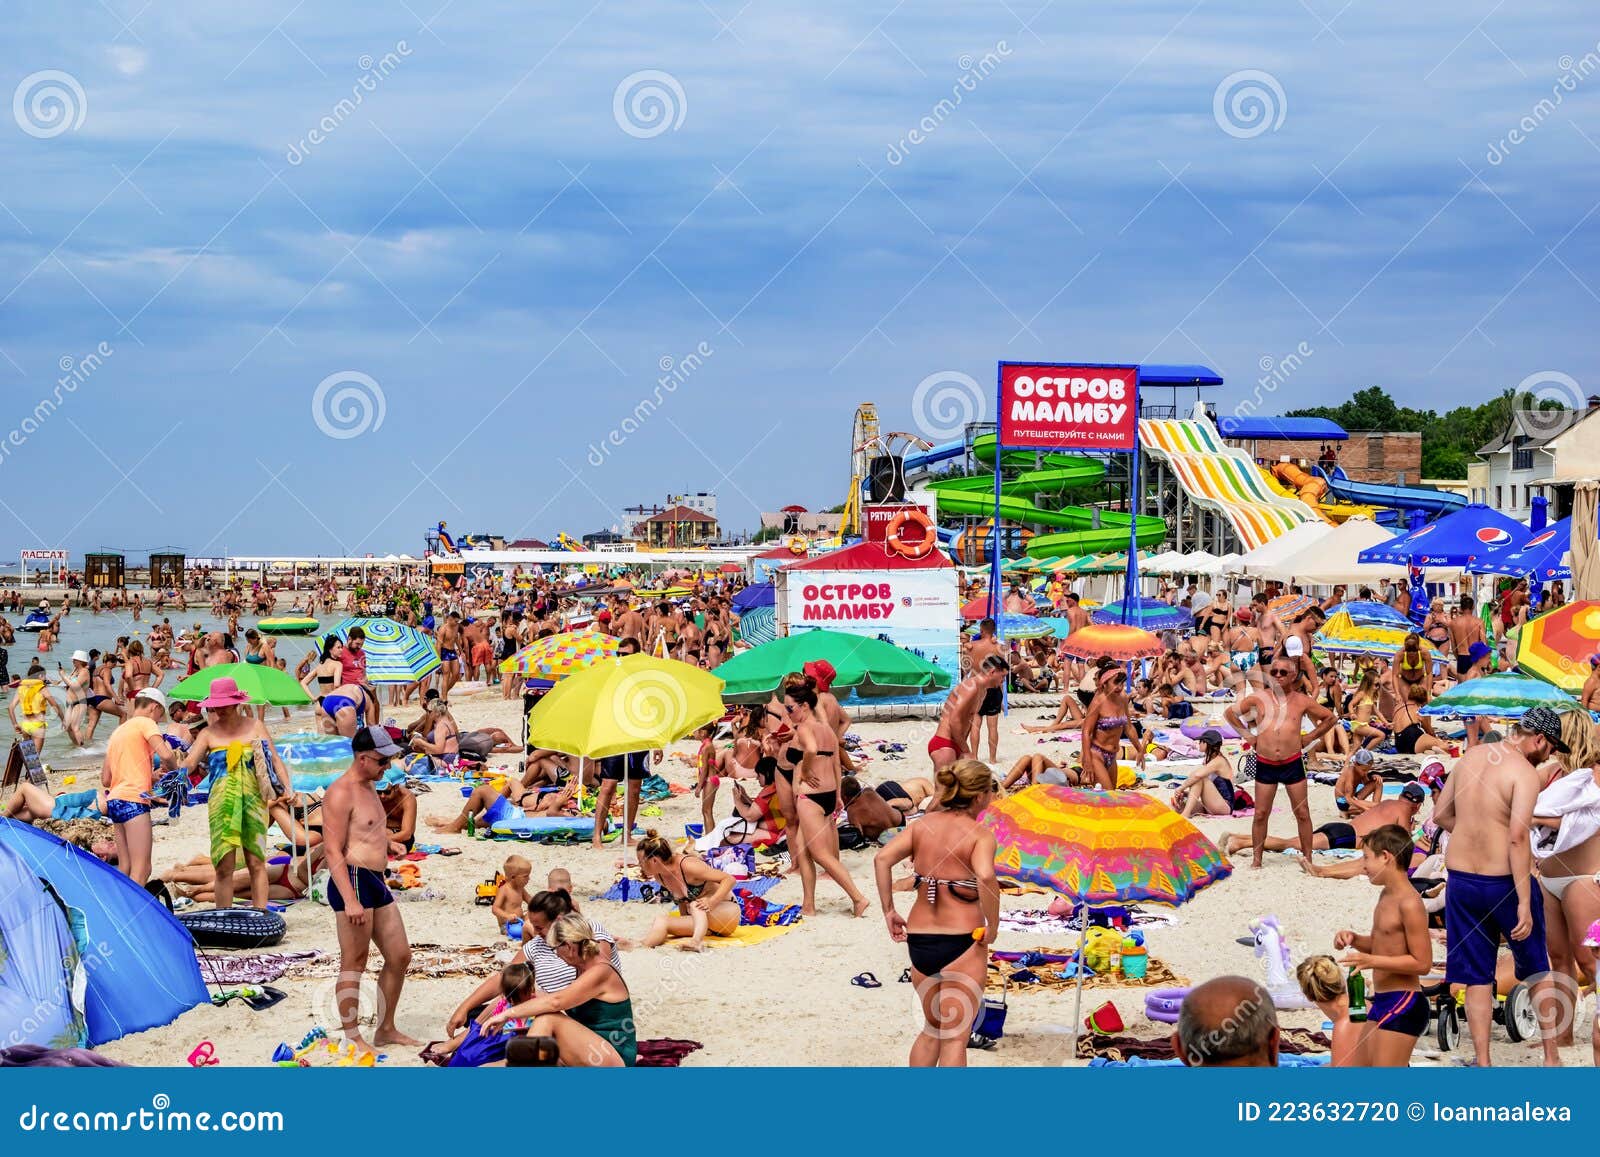 Many People on the Beach at Zaliznyi Port. a Crowd of Naked People in  Swimsuits Sunbathes Editorial Image - Image of holiday, relax: 223632720